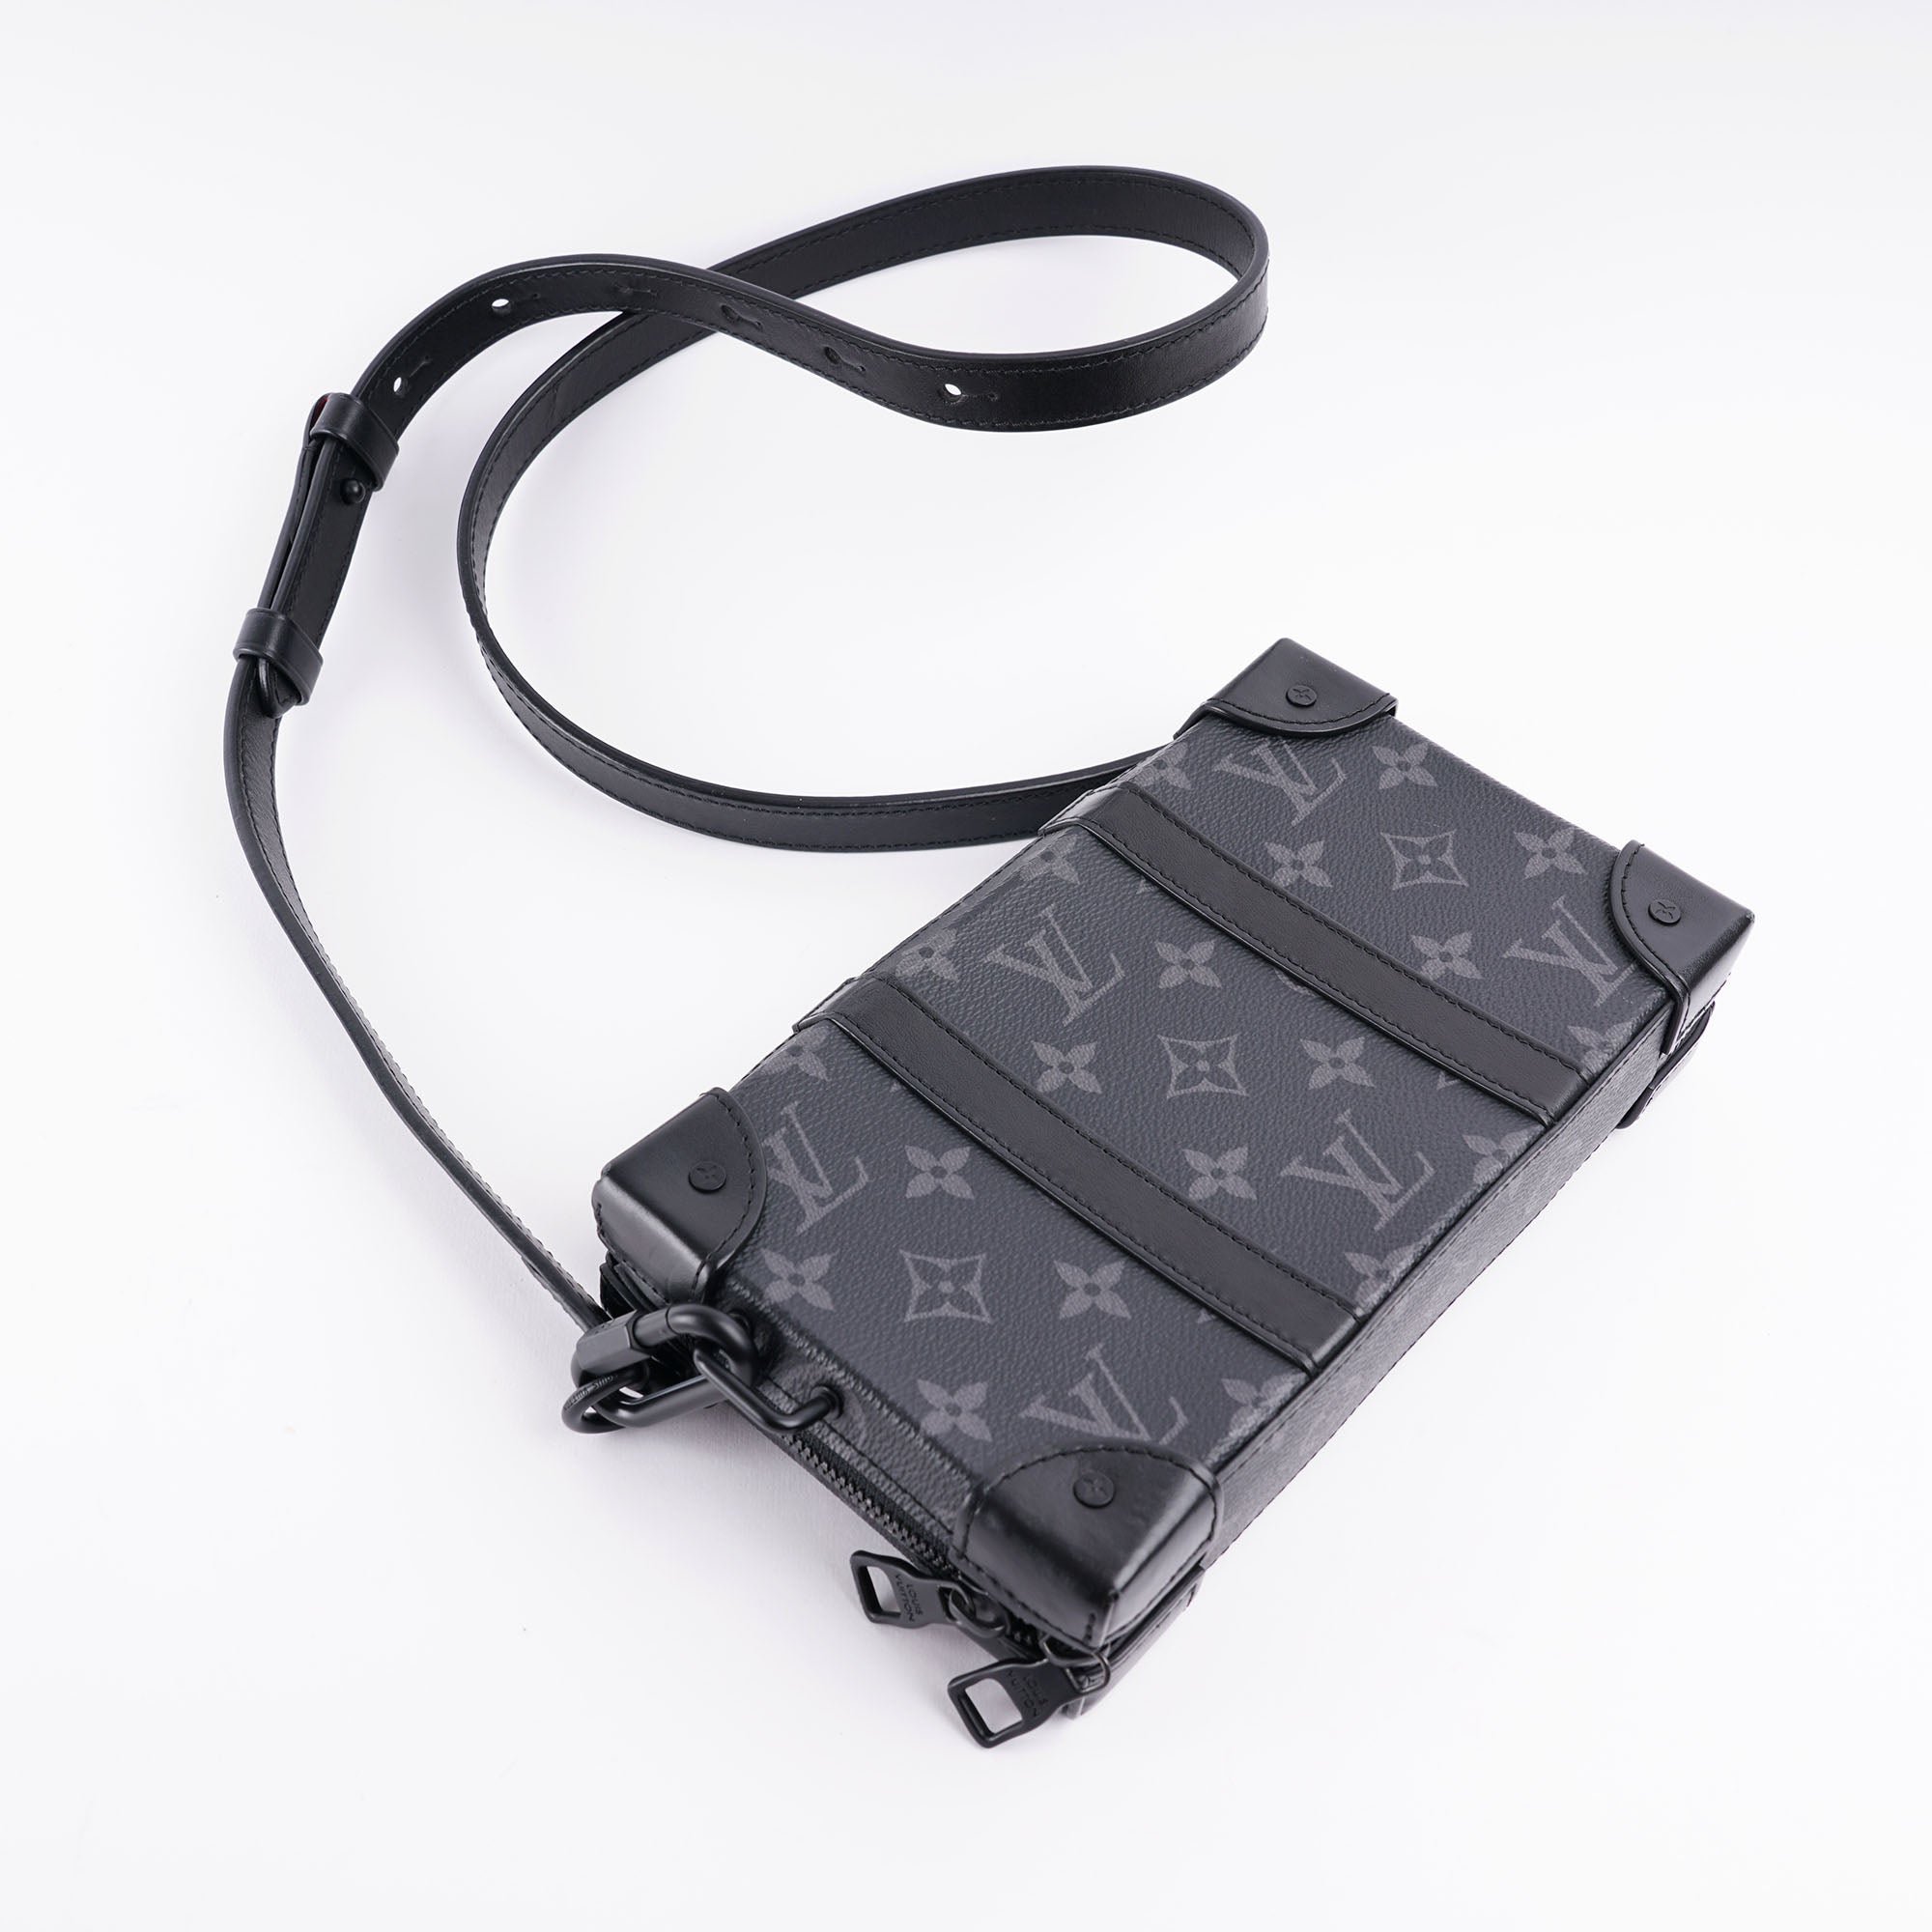 Trunk Wallet - LOUIS VUITTON - Affordable Luxury image